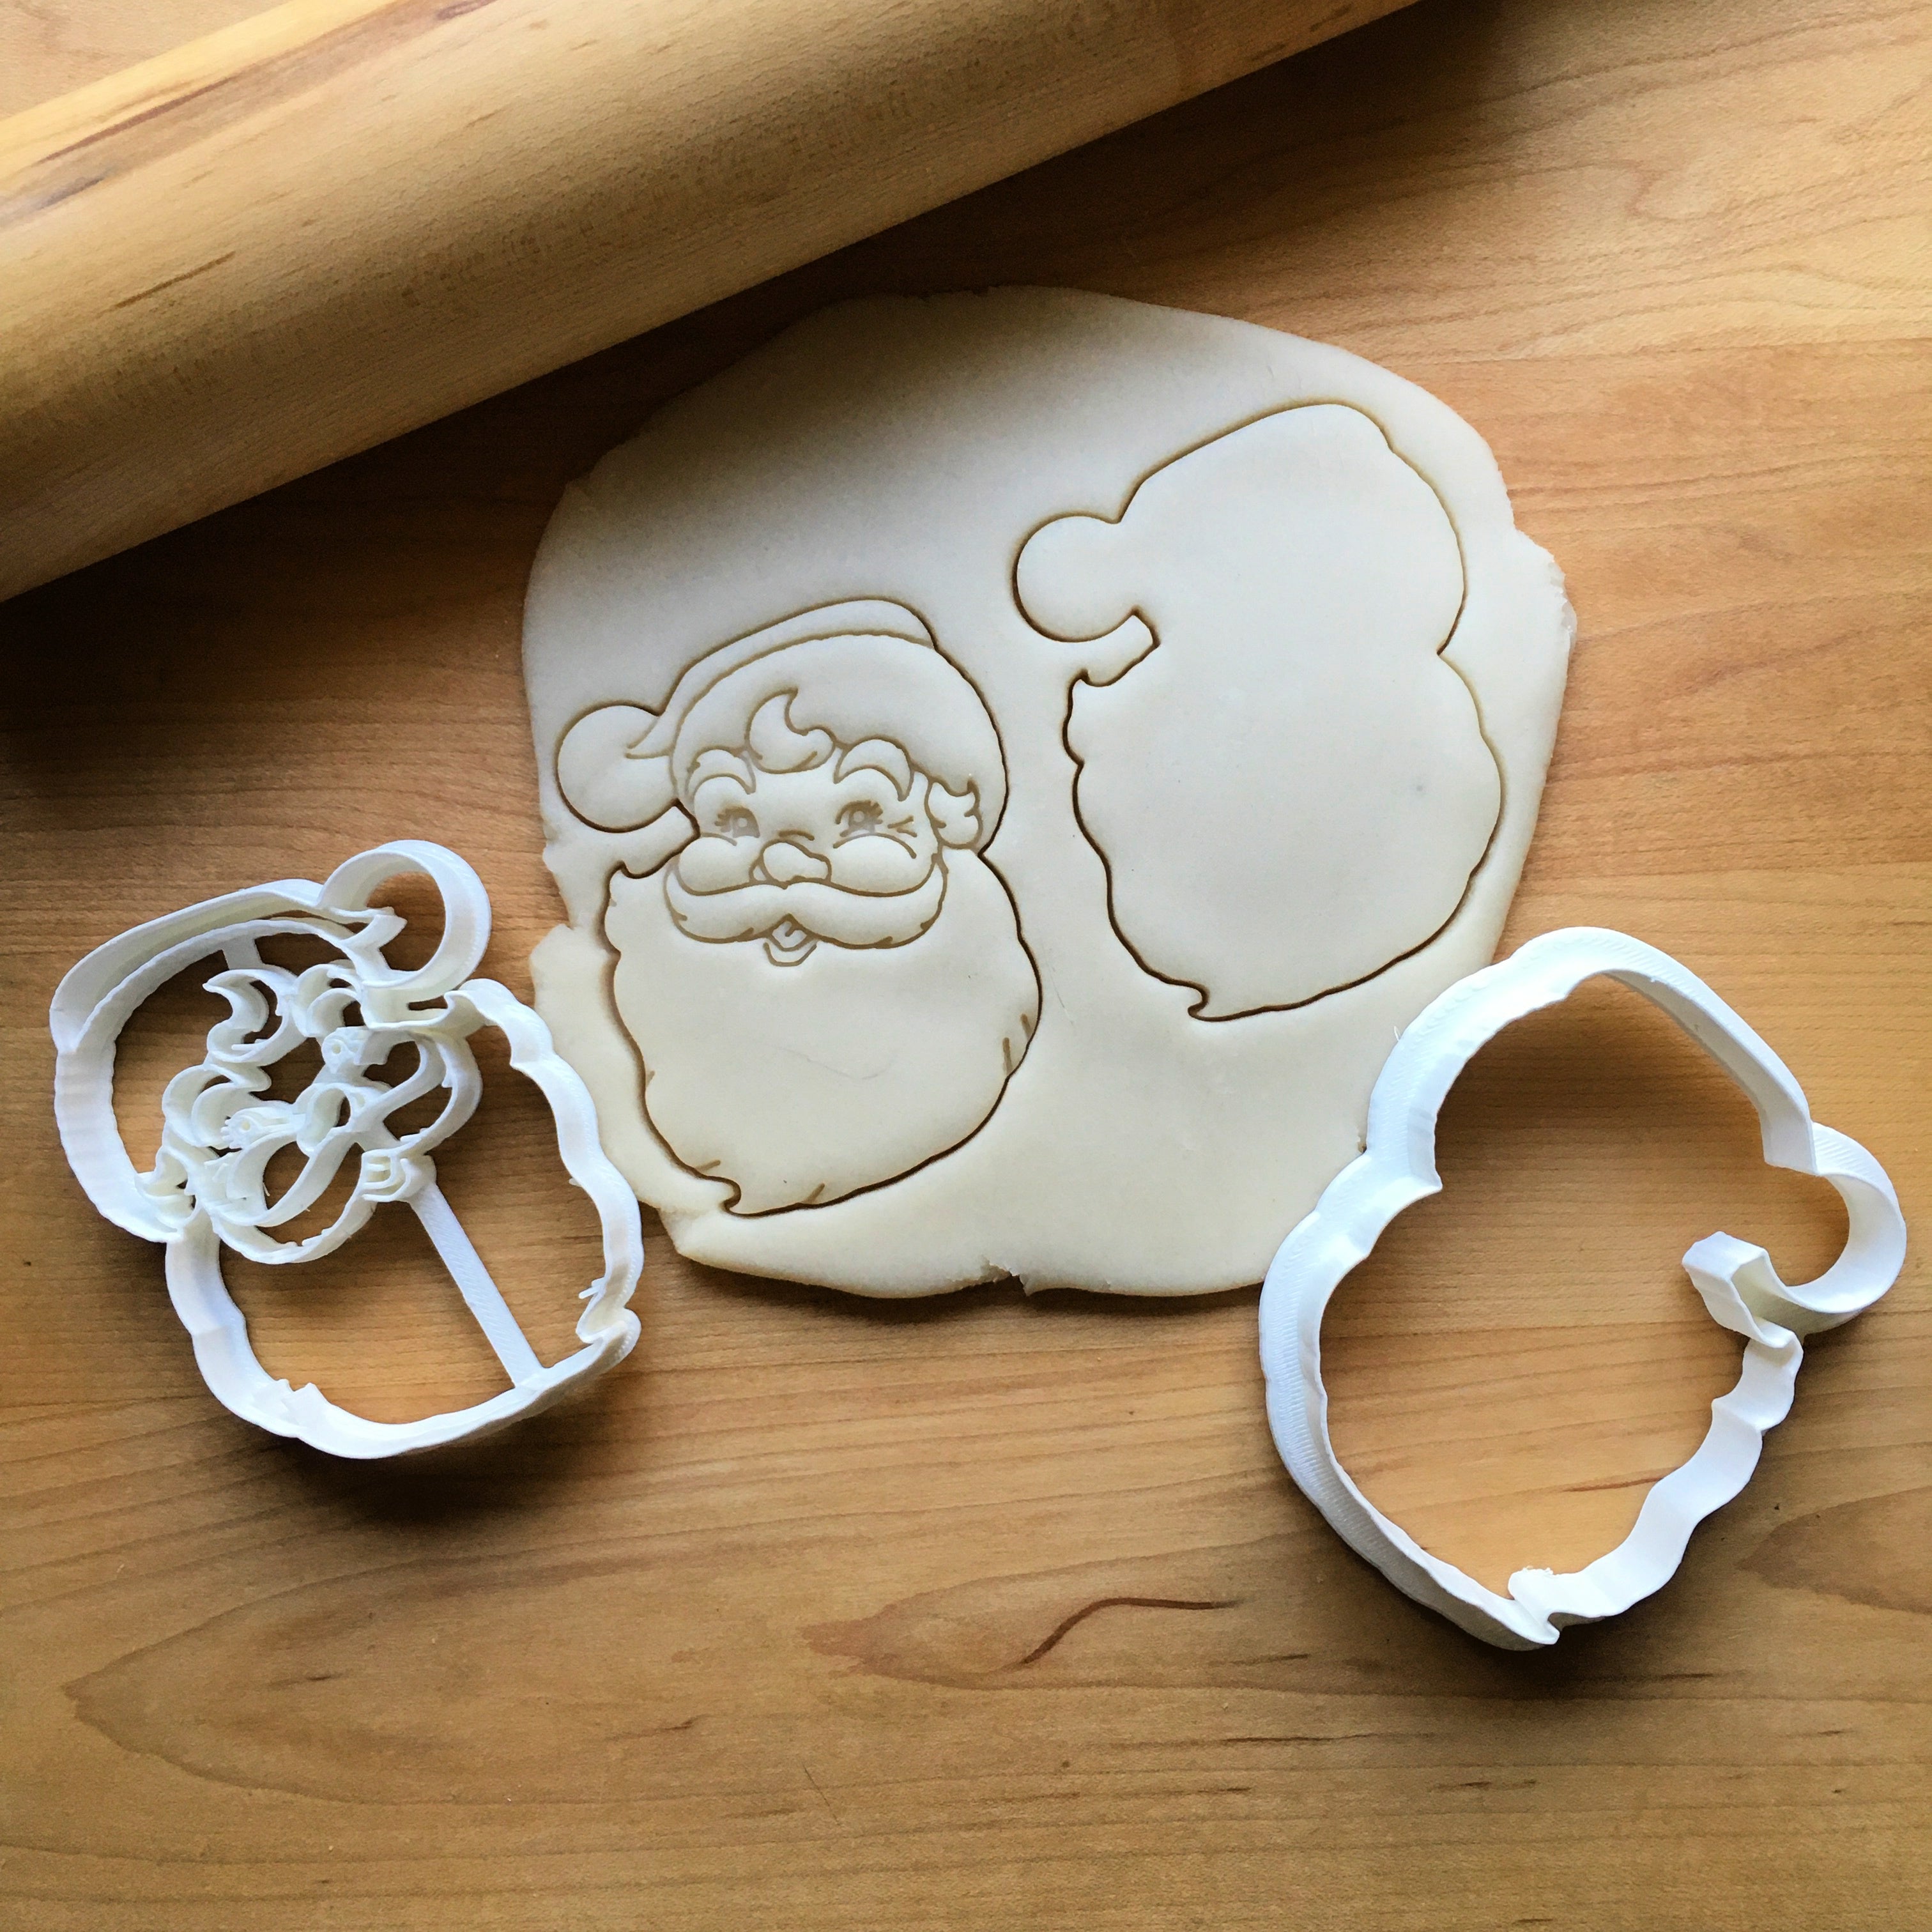 Set of 2 Classic Santa Claus Cookie Cutters/Dishwasher Safe